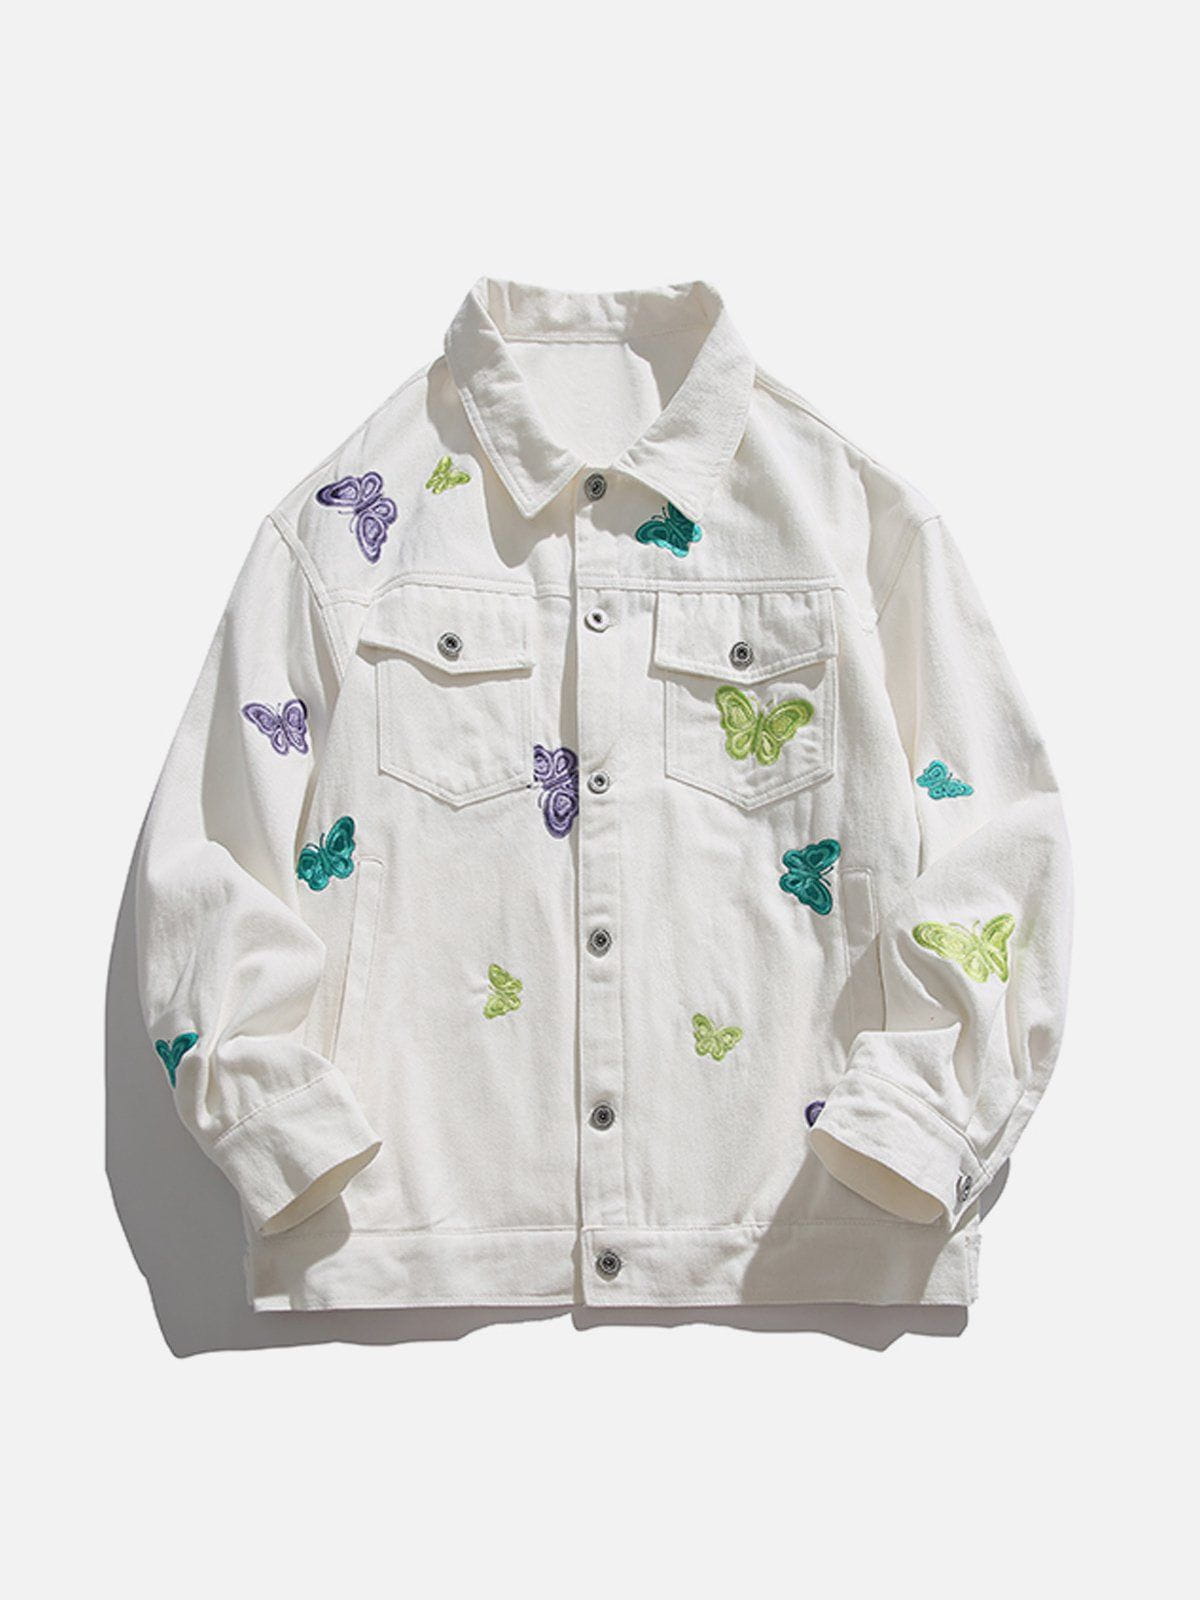 Majesda® - Vintage Butterfly Embroidered Jacket outfit ideas, streetwear fashion - majesda.com